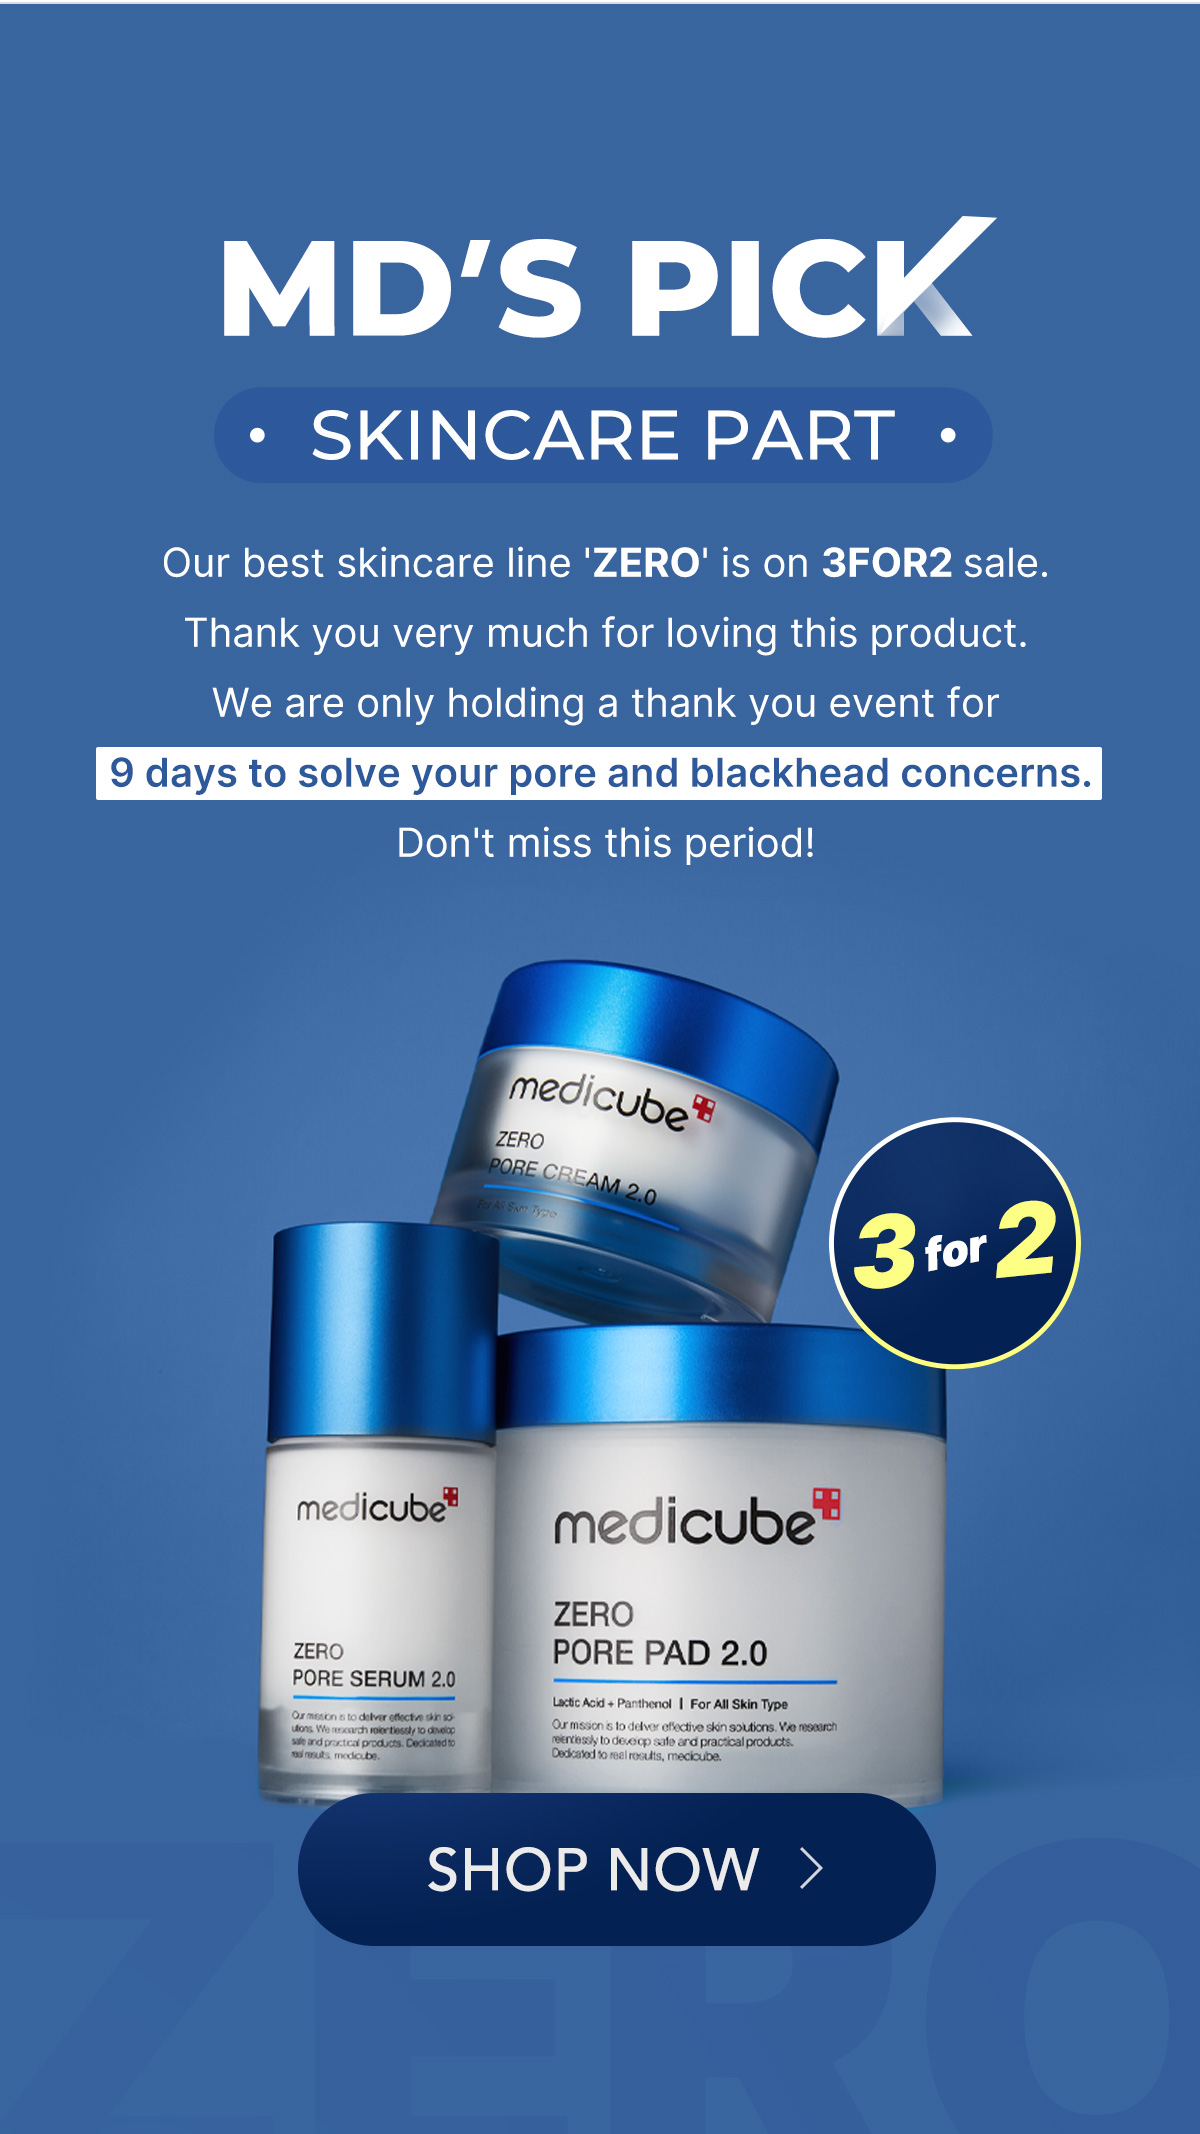 MD'S PICK SKINCARE PART - Our best skincare line 'ZERO' is on 3FOR2 sale. Thank you very much for loving this product. We are only holding a thank you event for 9 days to solve your pore and blackhead concerns. Don't miss this period! medicube ZERO PORE PAD 2.0 PORE SERUM 2.0 SHOP NOW 